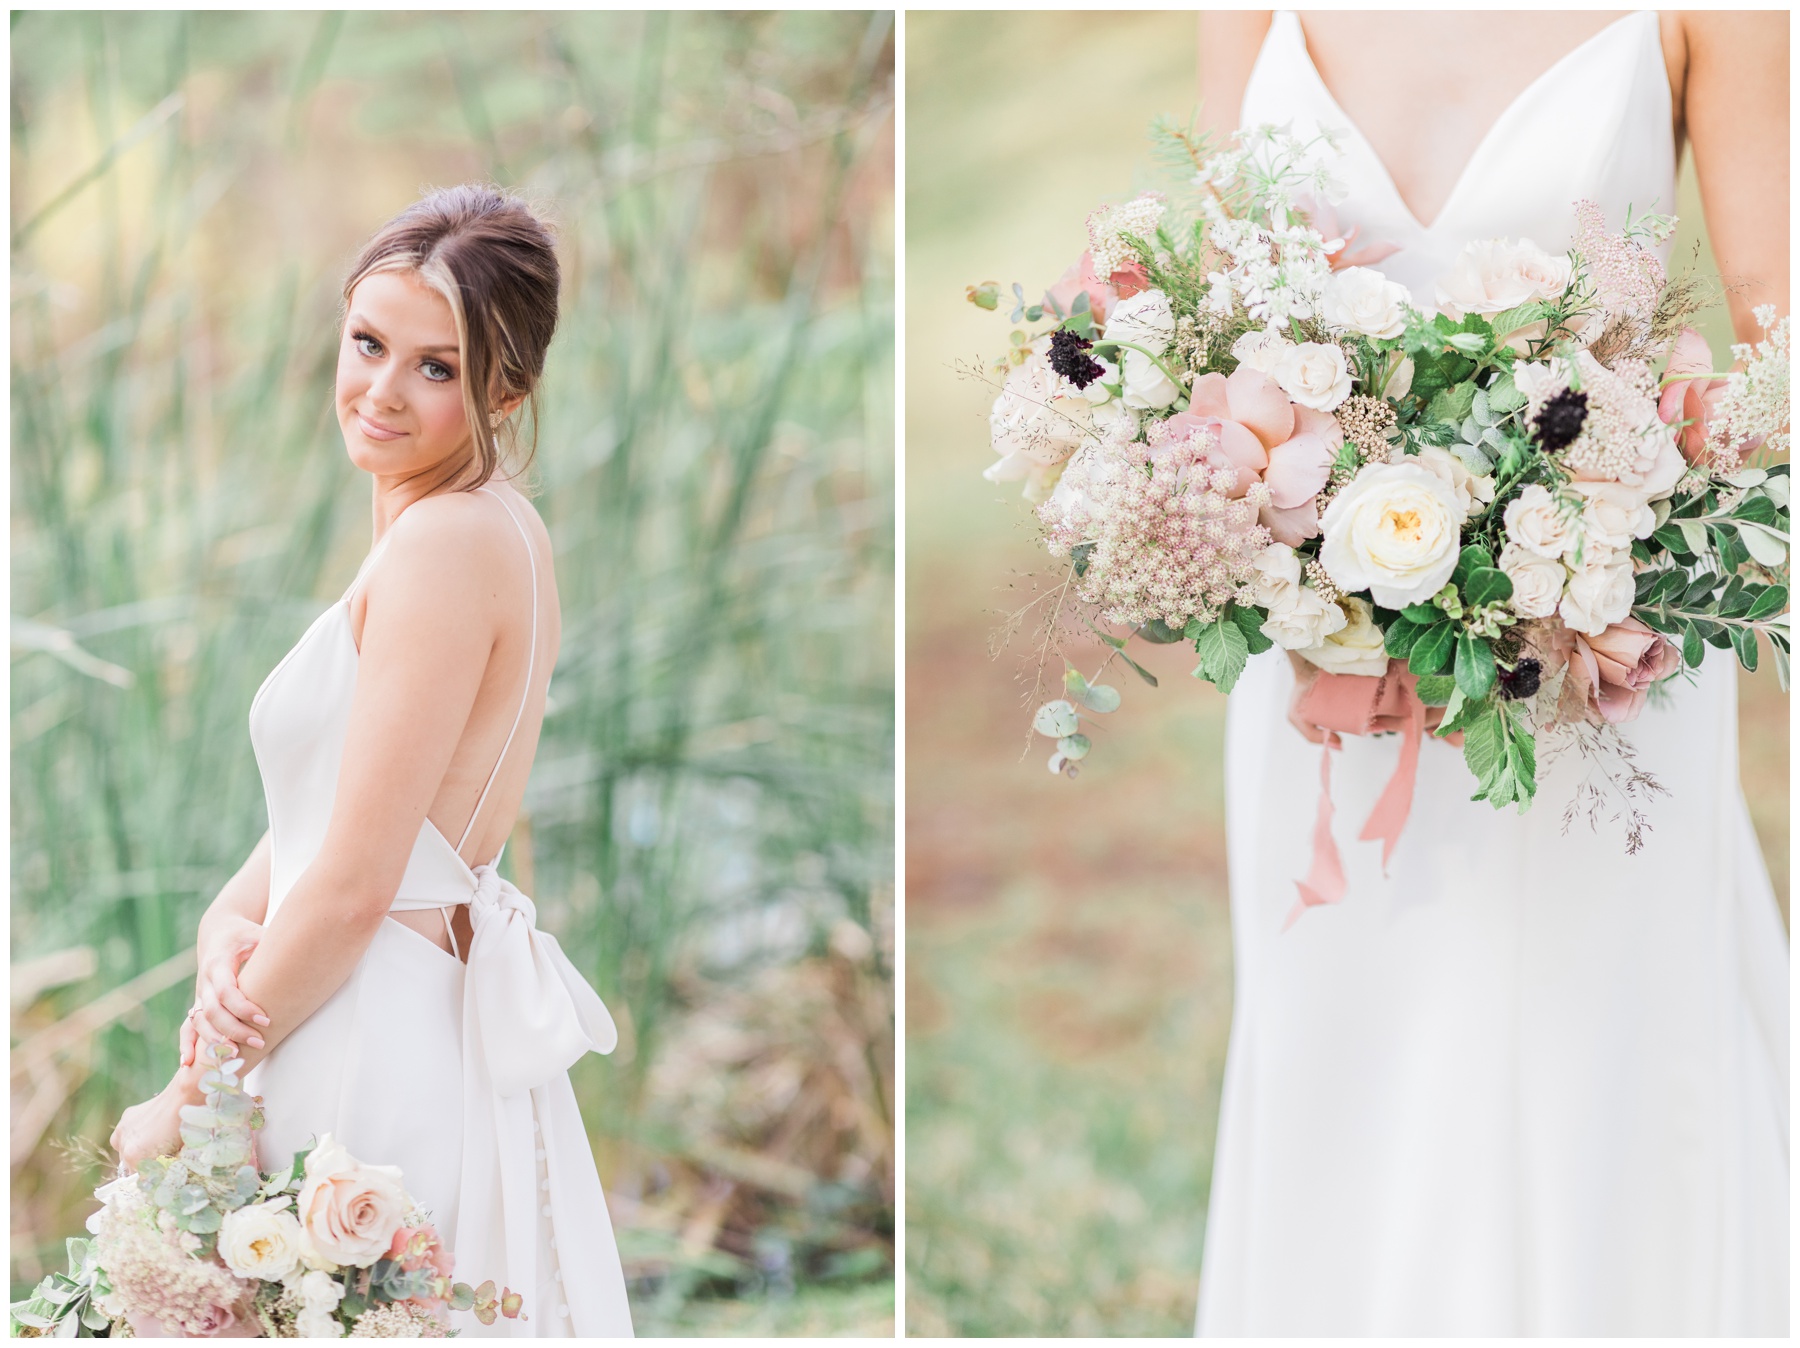 Bride holding a bouquet filled with mauve roses, chocolate cosmos, and wildflowers